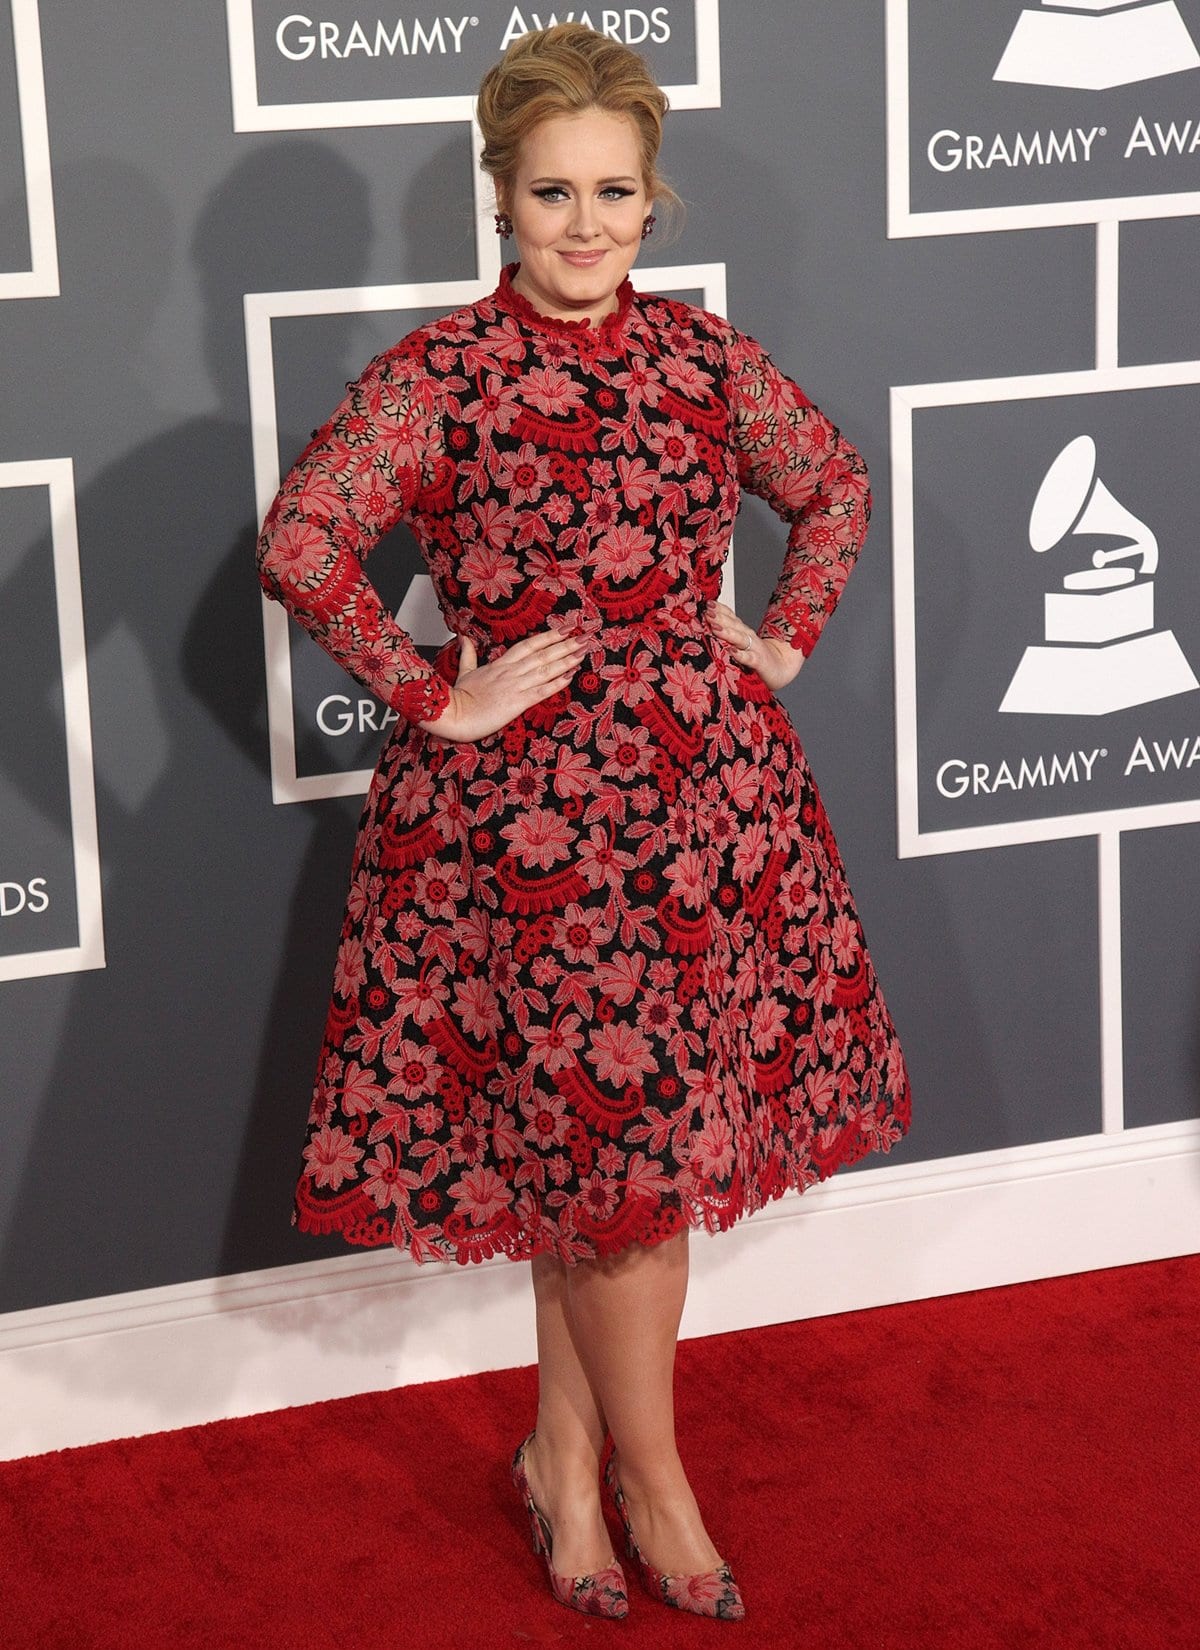 Adele in a floral Valentino dress and matching heels at the 2013 Grammy Awards